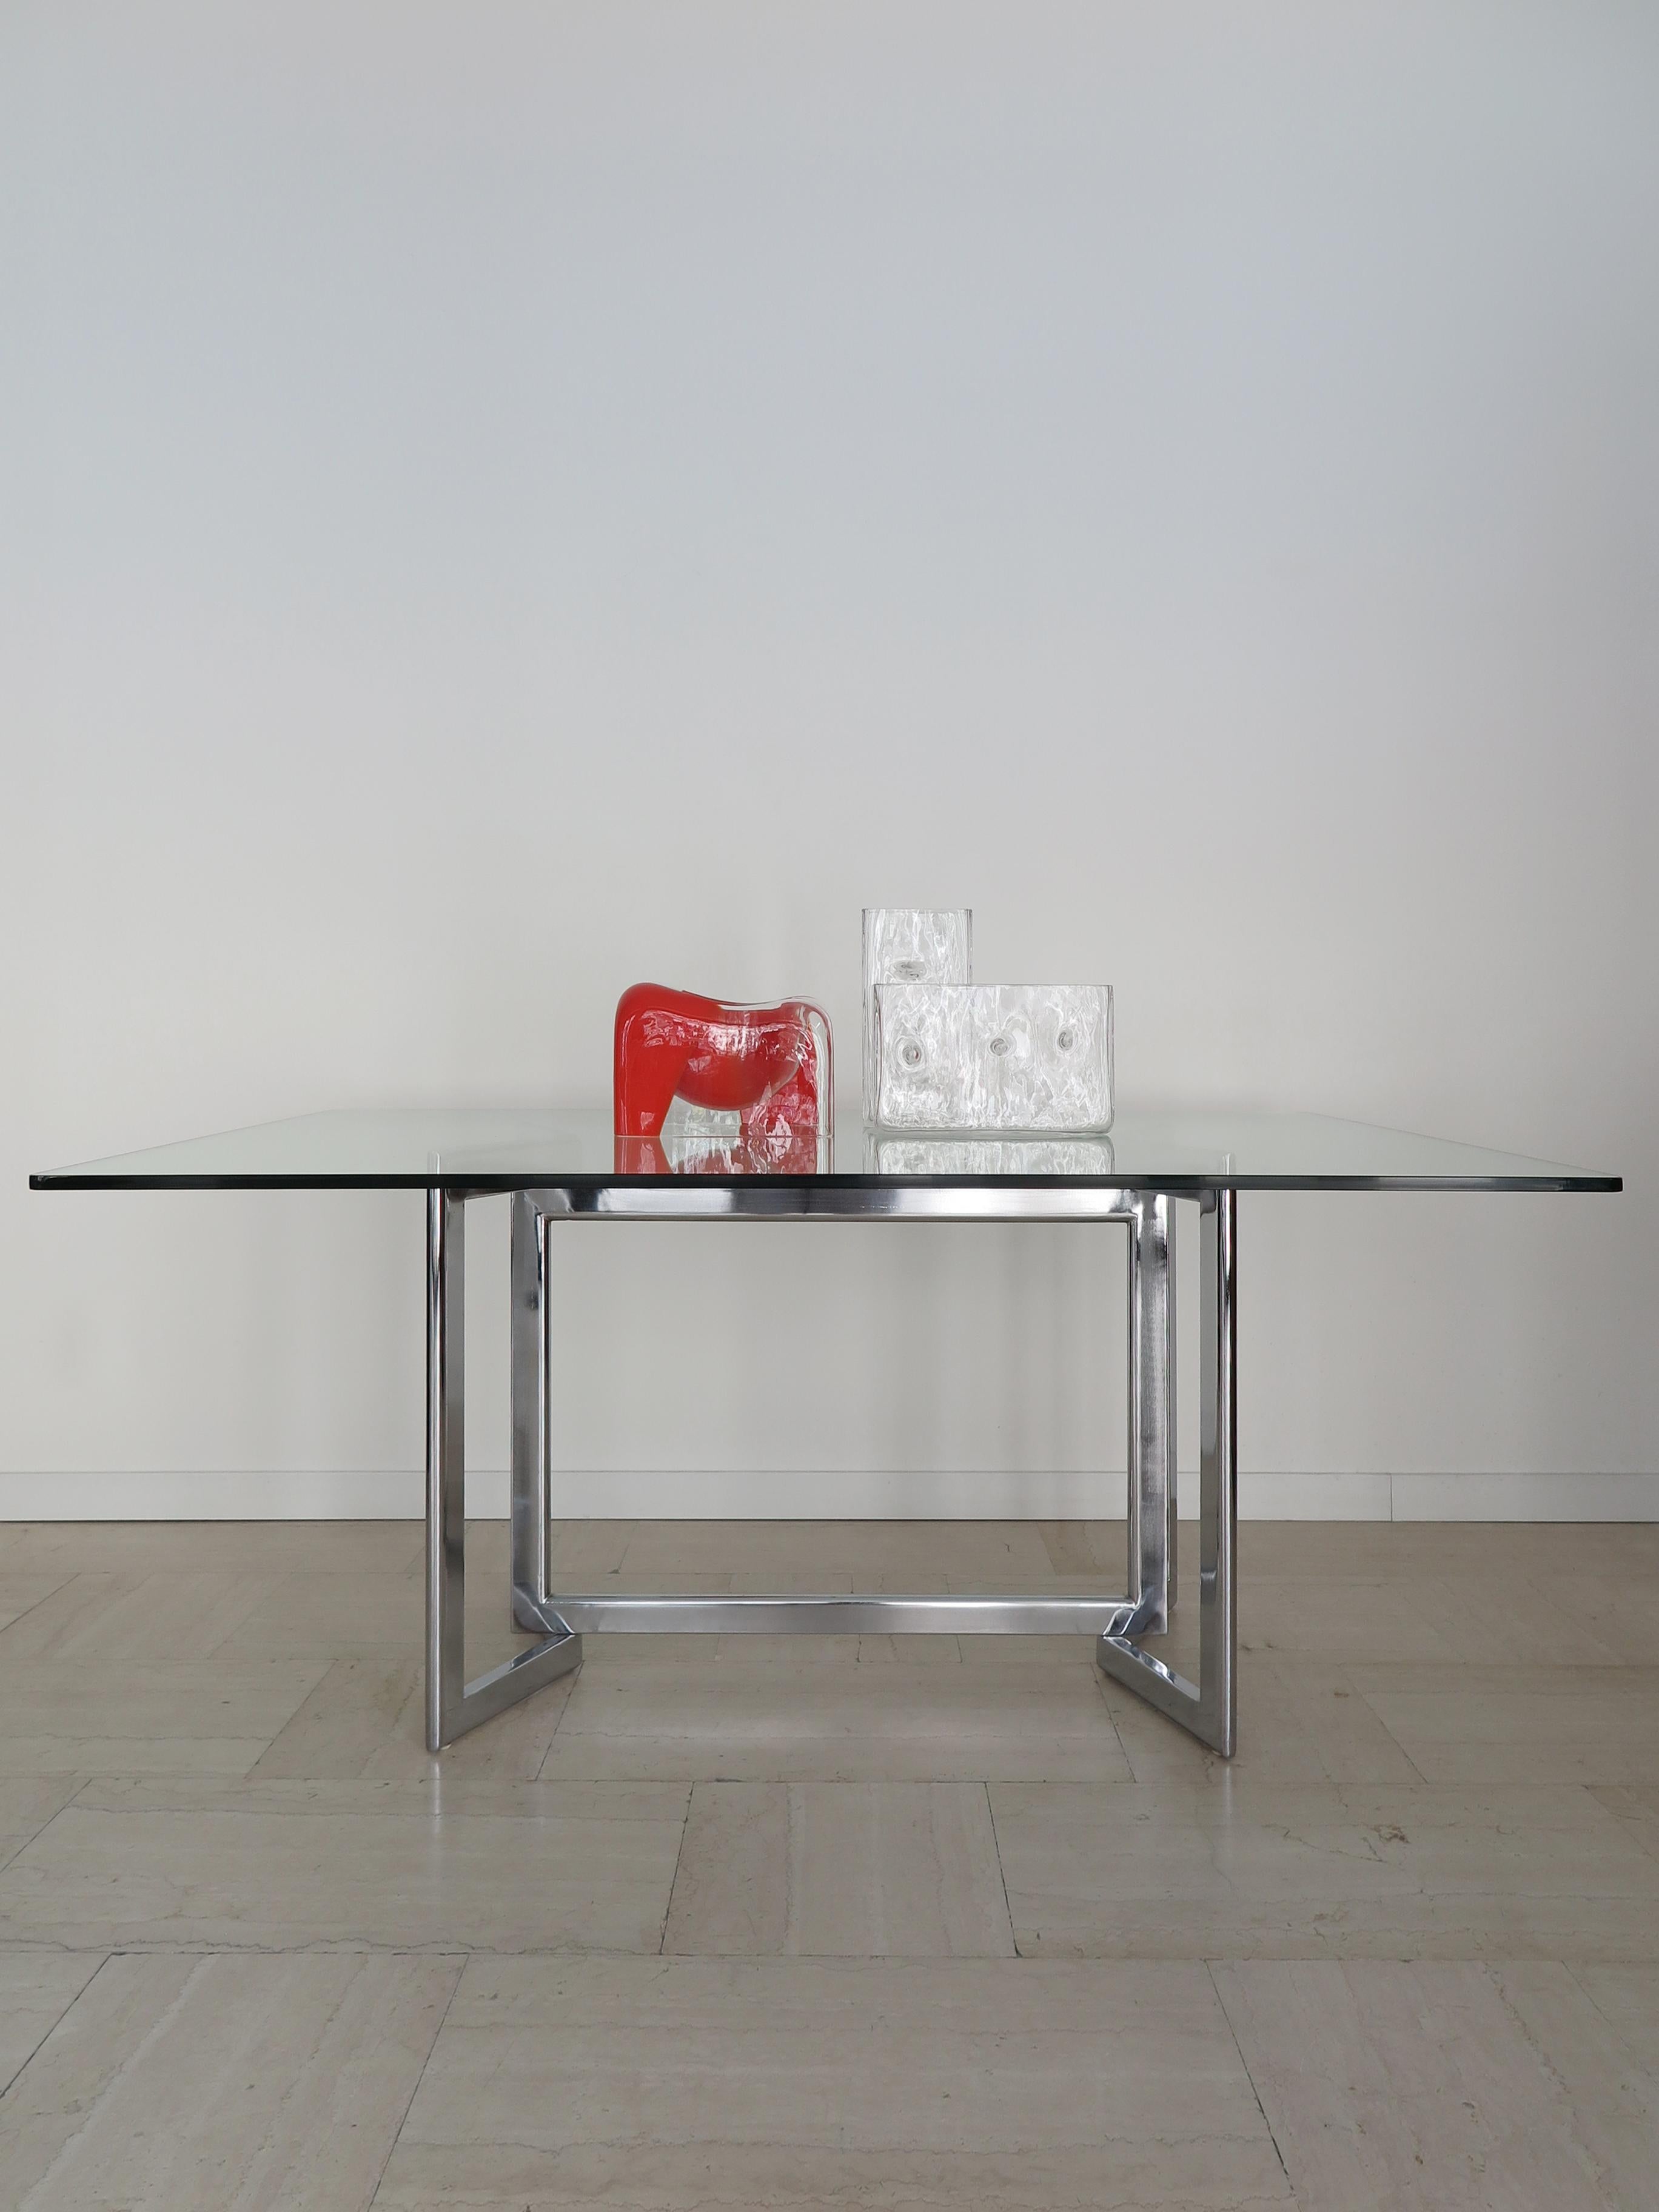 Italian midcentury nodern design dining table “Davide “ model designed by Studio Simon and produced by Simon Gavina with partially foldable chrome-plated steel frame and clear glass top, production Italy 1970s

Bibliography:
Fondazione Scientifica